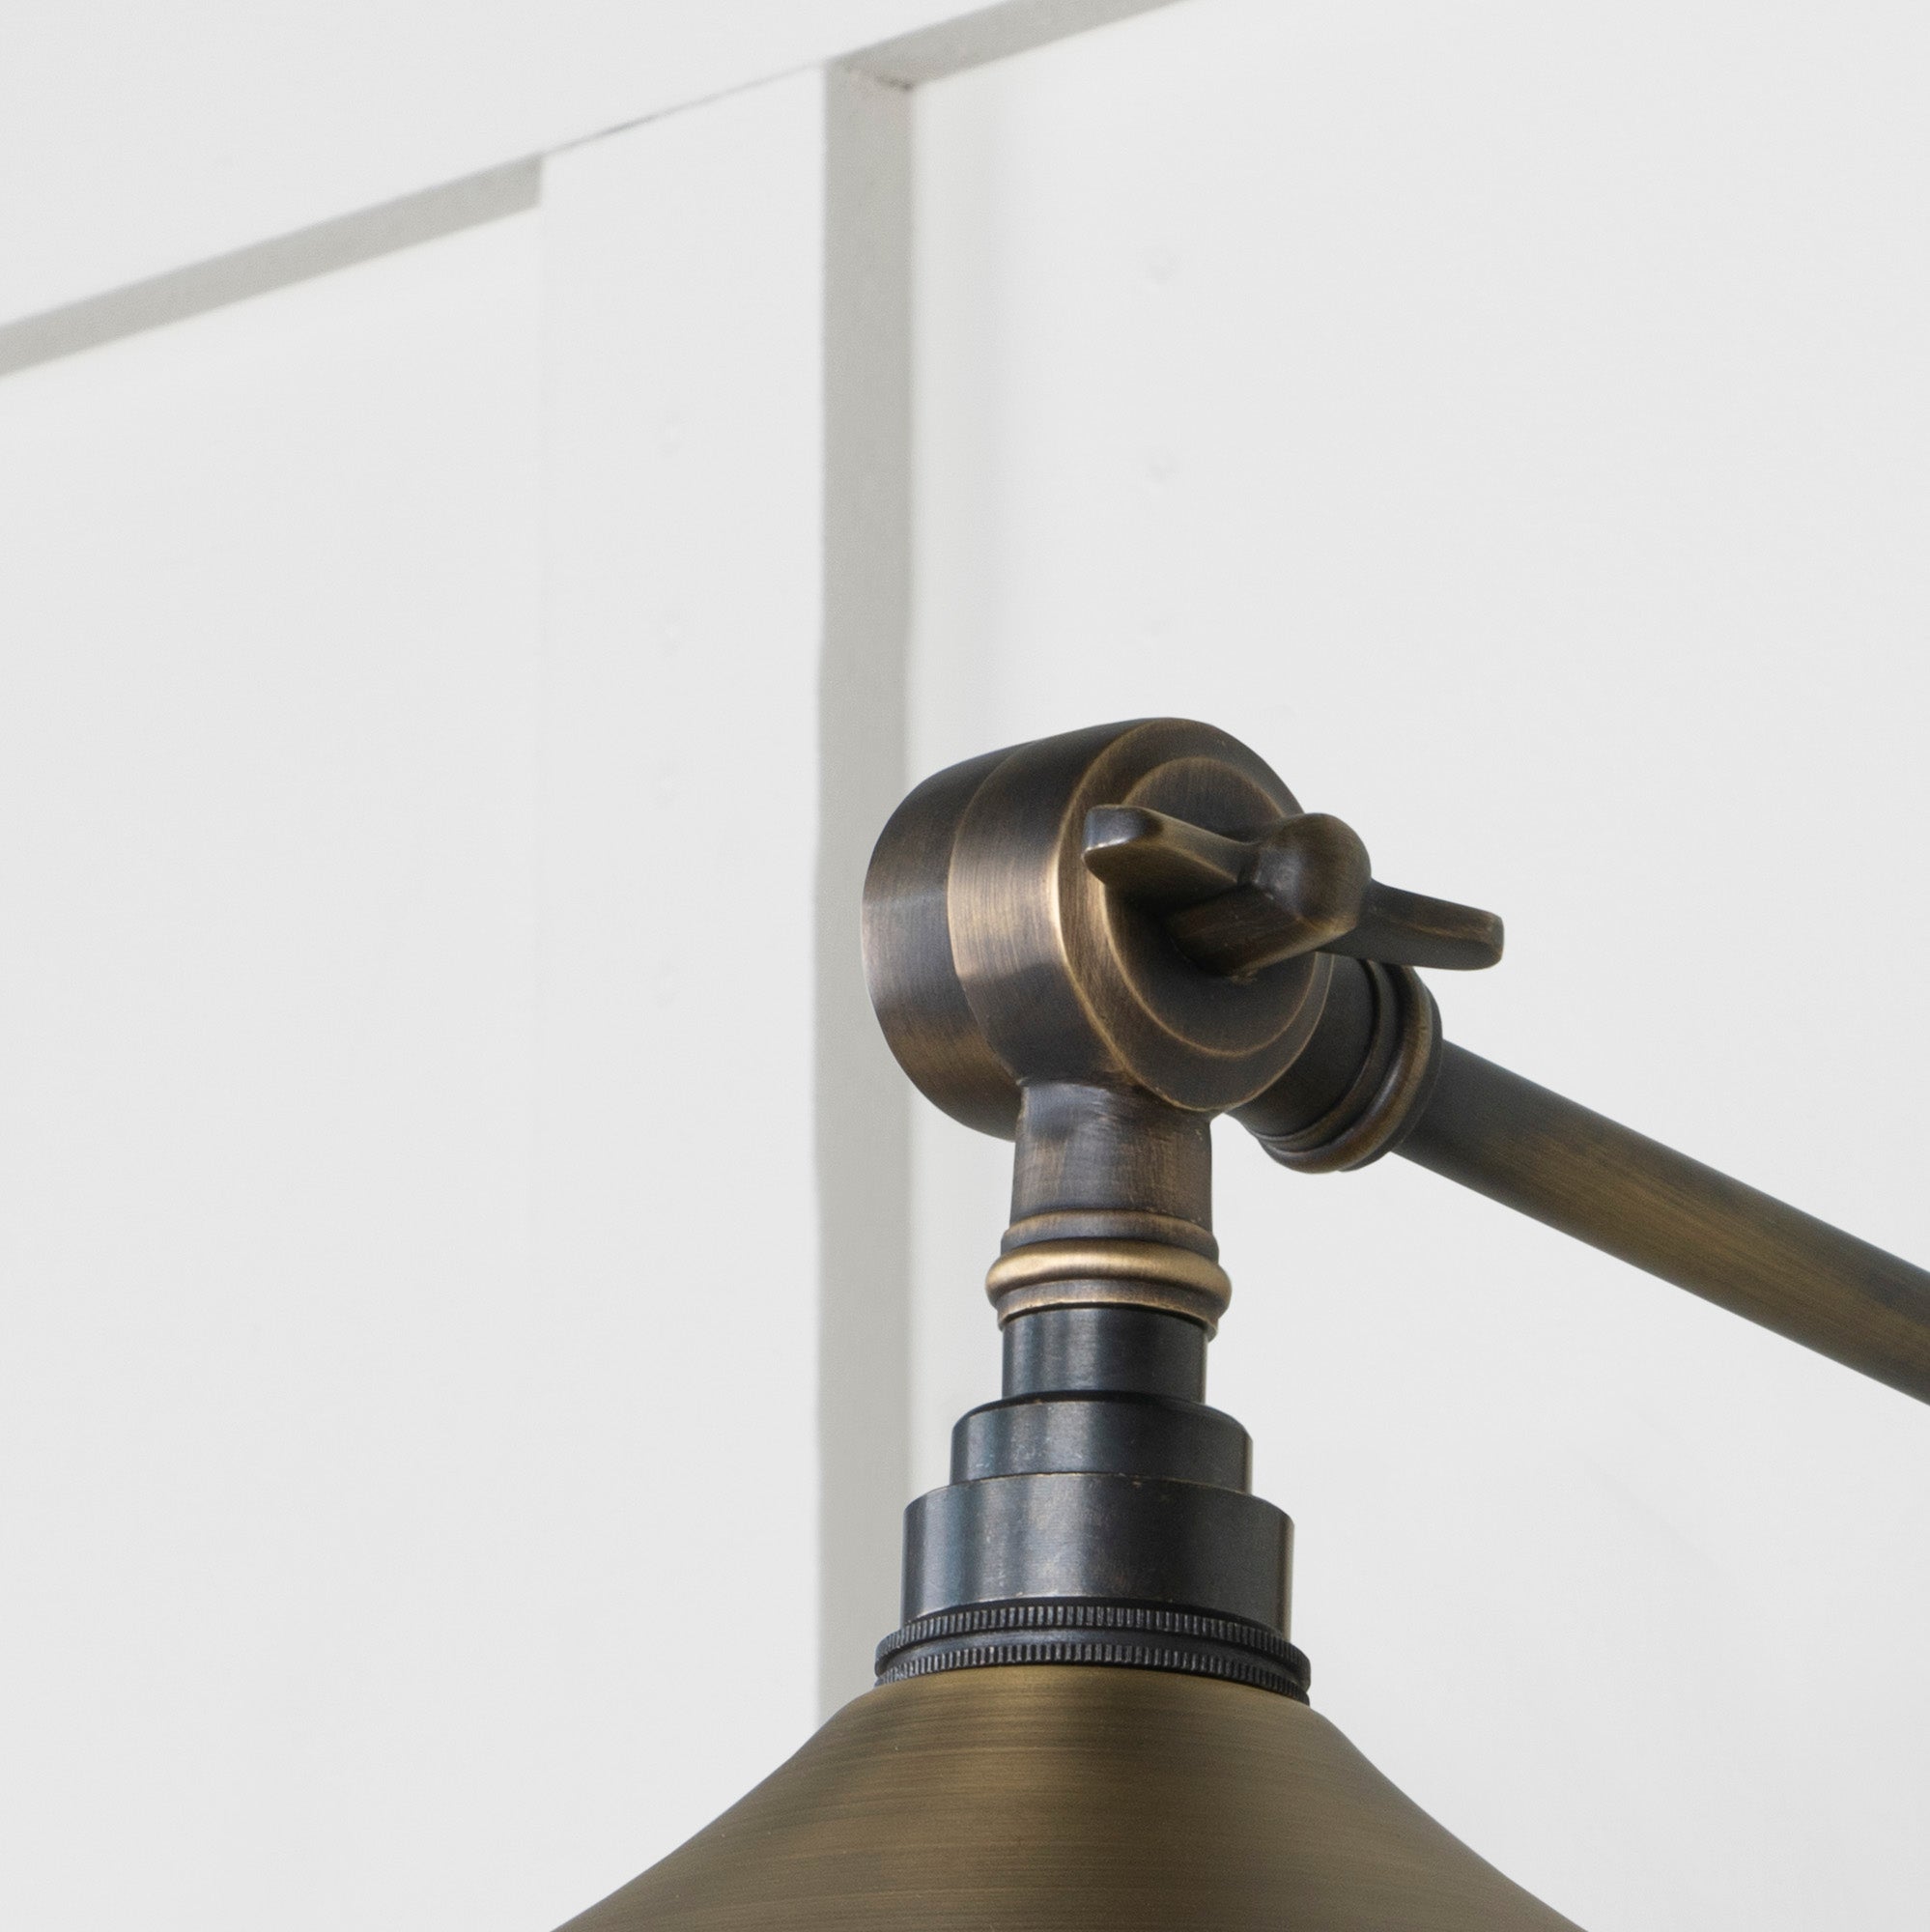 SHOW Close Up Image of Upper Hinge of Flora Wall Light in Aged Brass